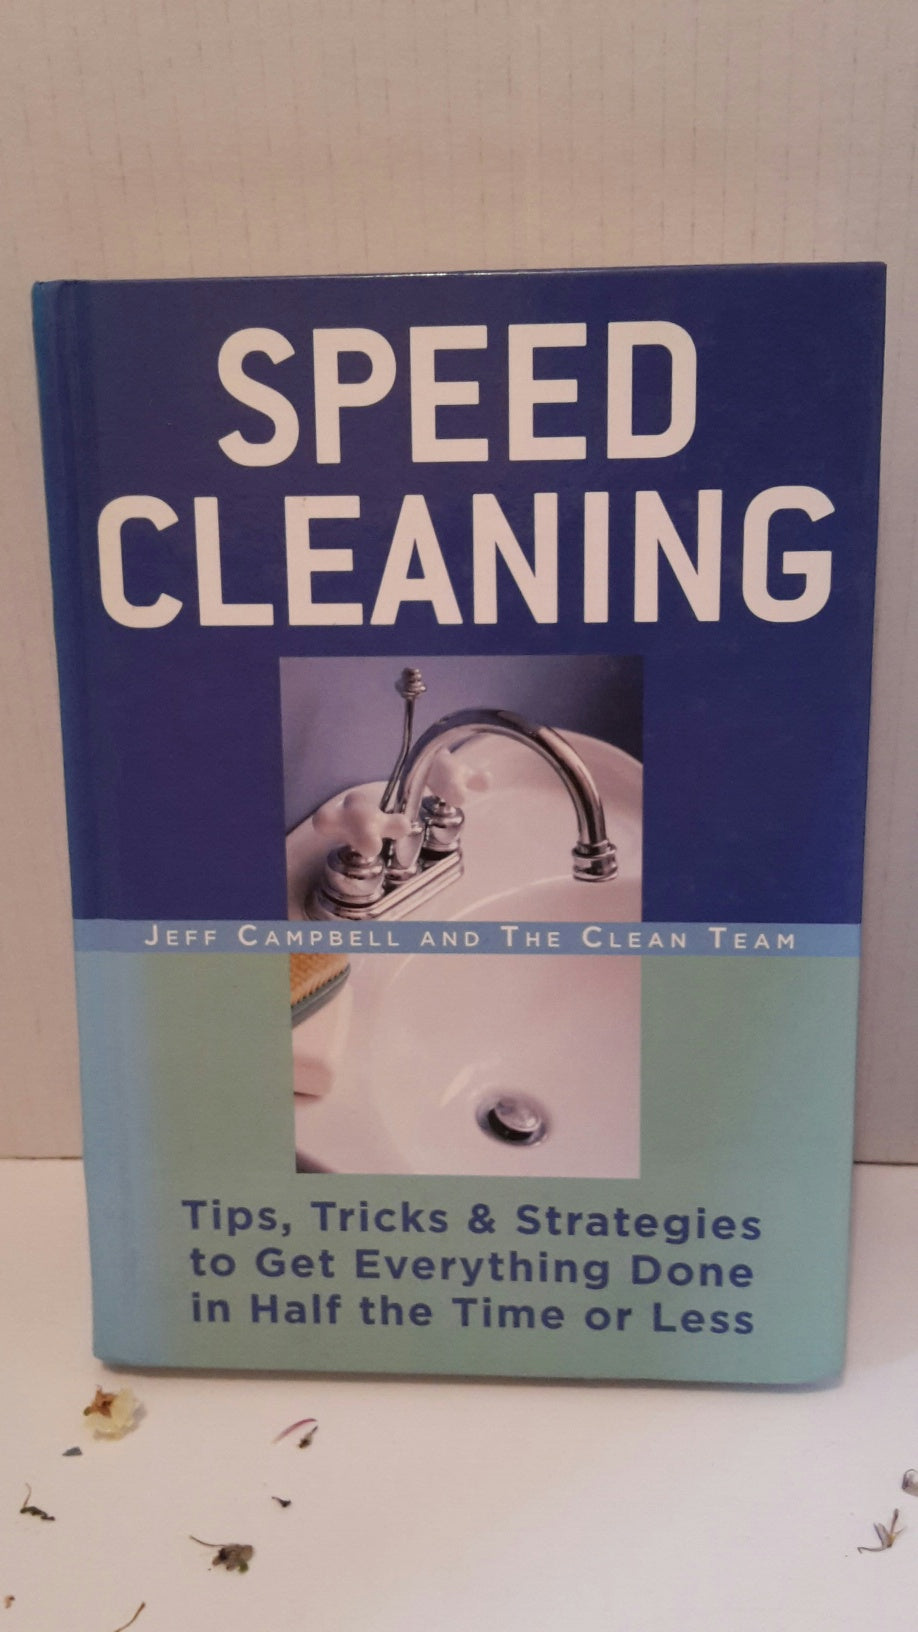 Speed Cleaning by Jeff Campbell and The Clean Team